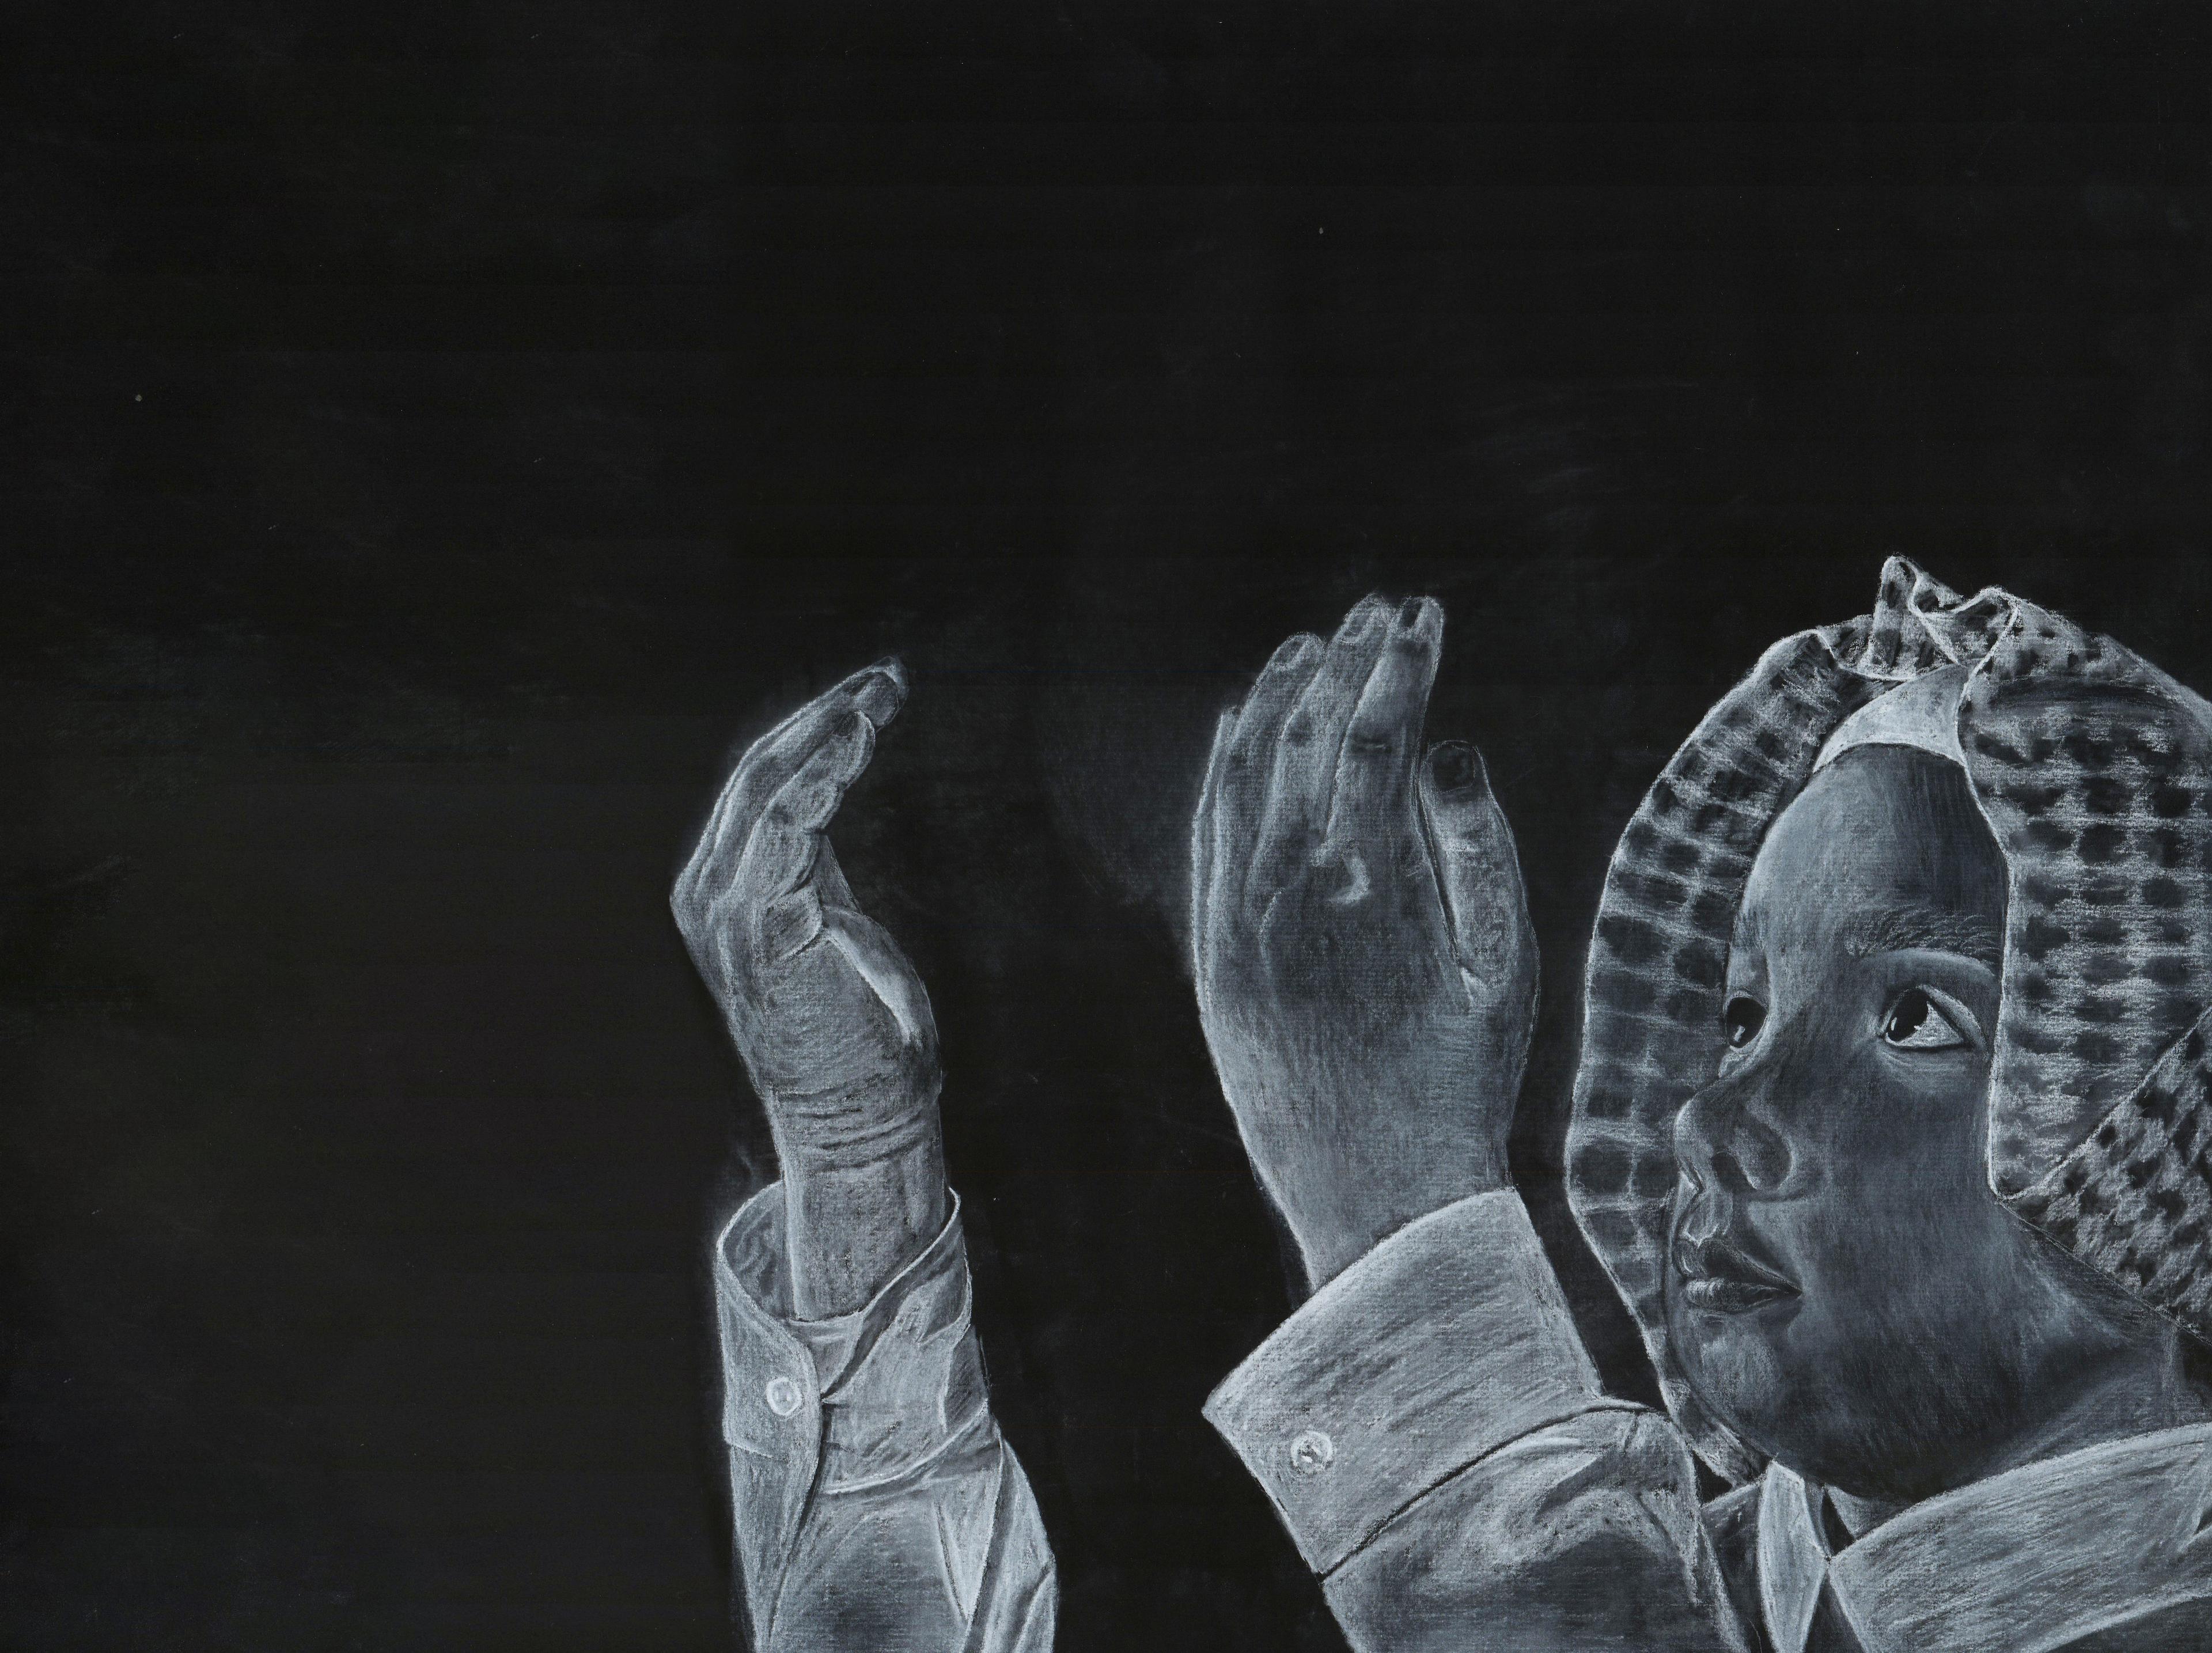 Charcoal reversed white-on-black drawing of a child's head and neck at bottom right, facing left, with hands raised in front, palms facing inward. The child looks upward and wears a keffiyeh draped over their heas and a long-sleeved shirt buttoned down at the cuffs and collar. The prominent background is almost fully black.